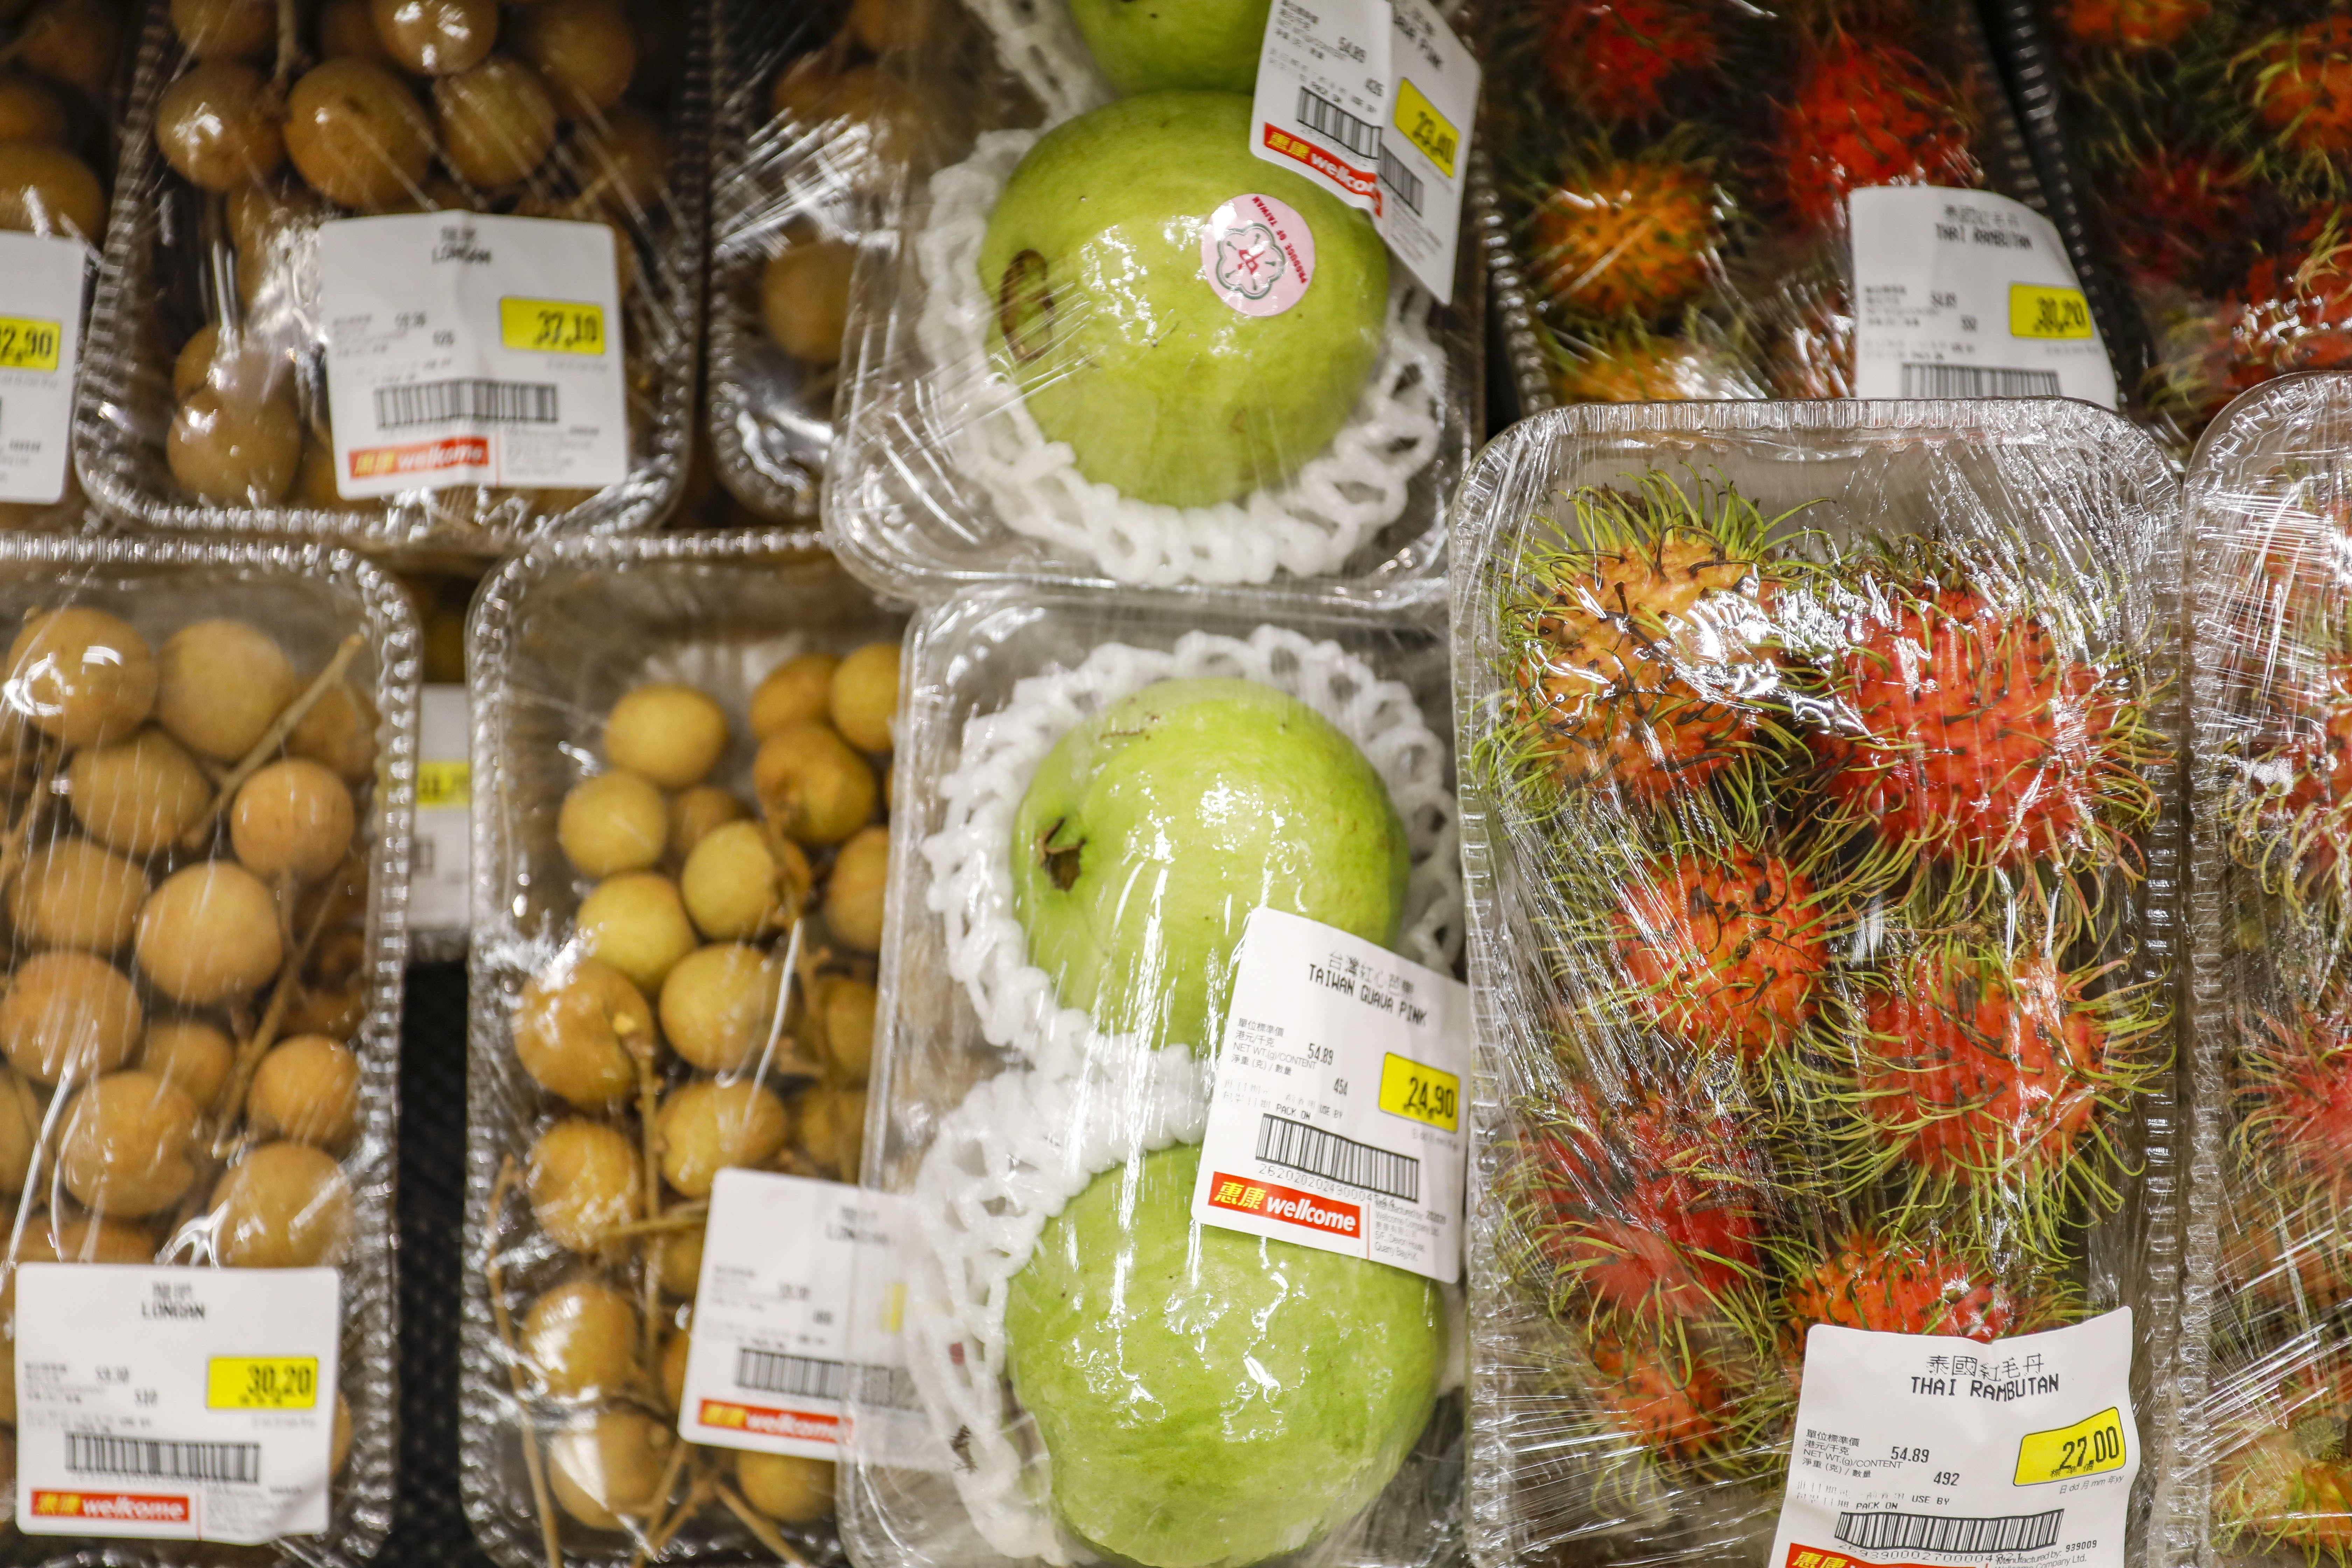 The survey Greenpeace ran in April this year revealed 70 per cent Hong Kong consumers preferred shopping in plastic-free supermarkets. Photo: Tory Ho